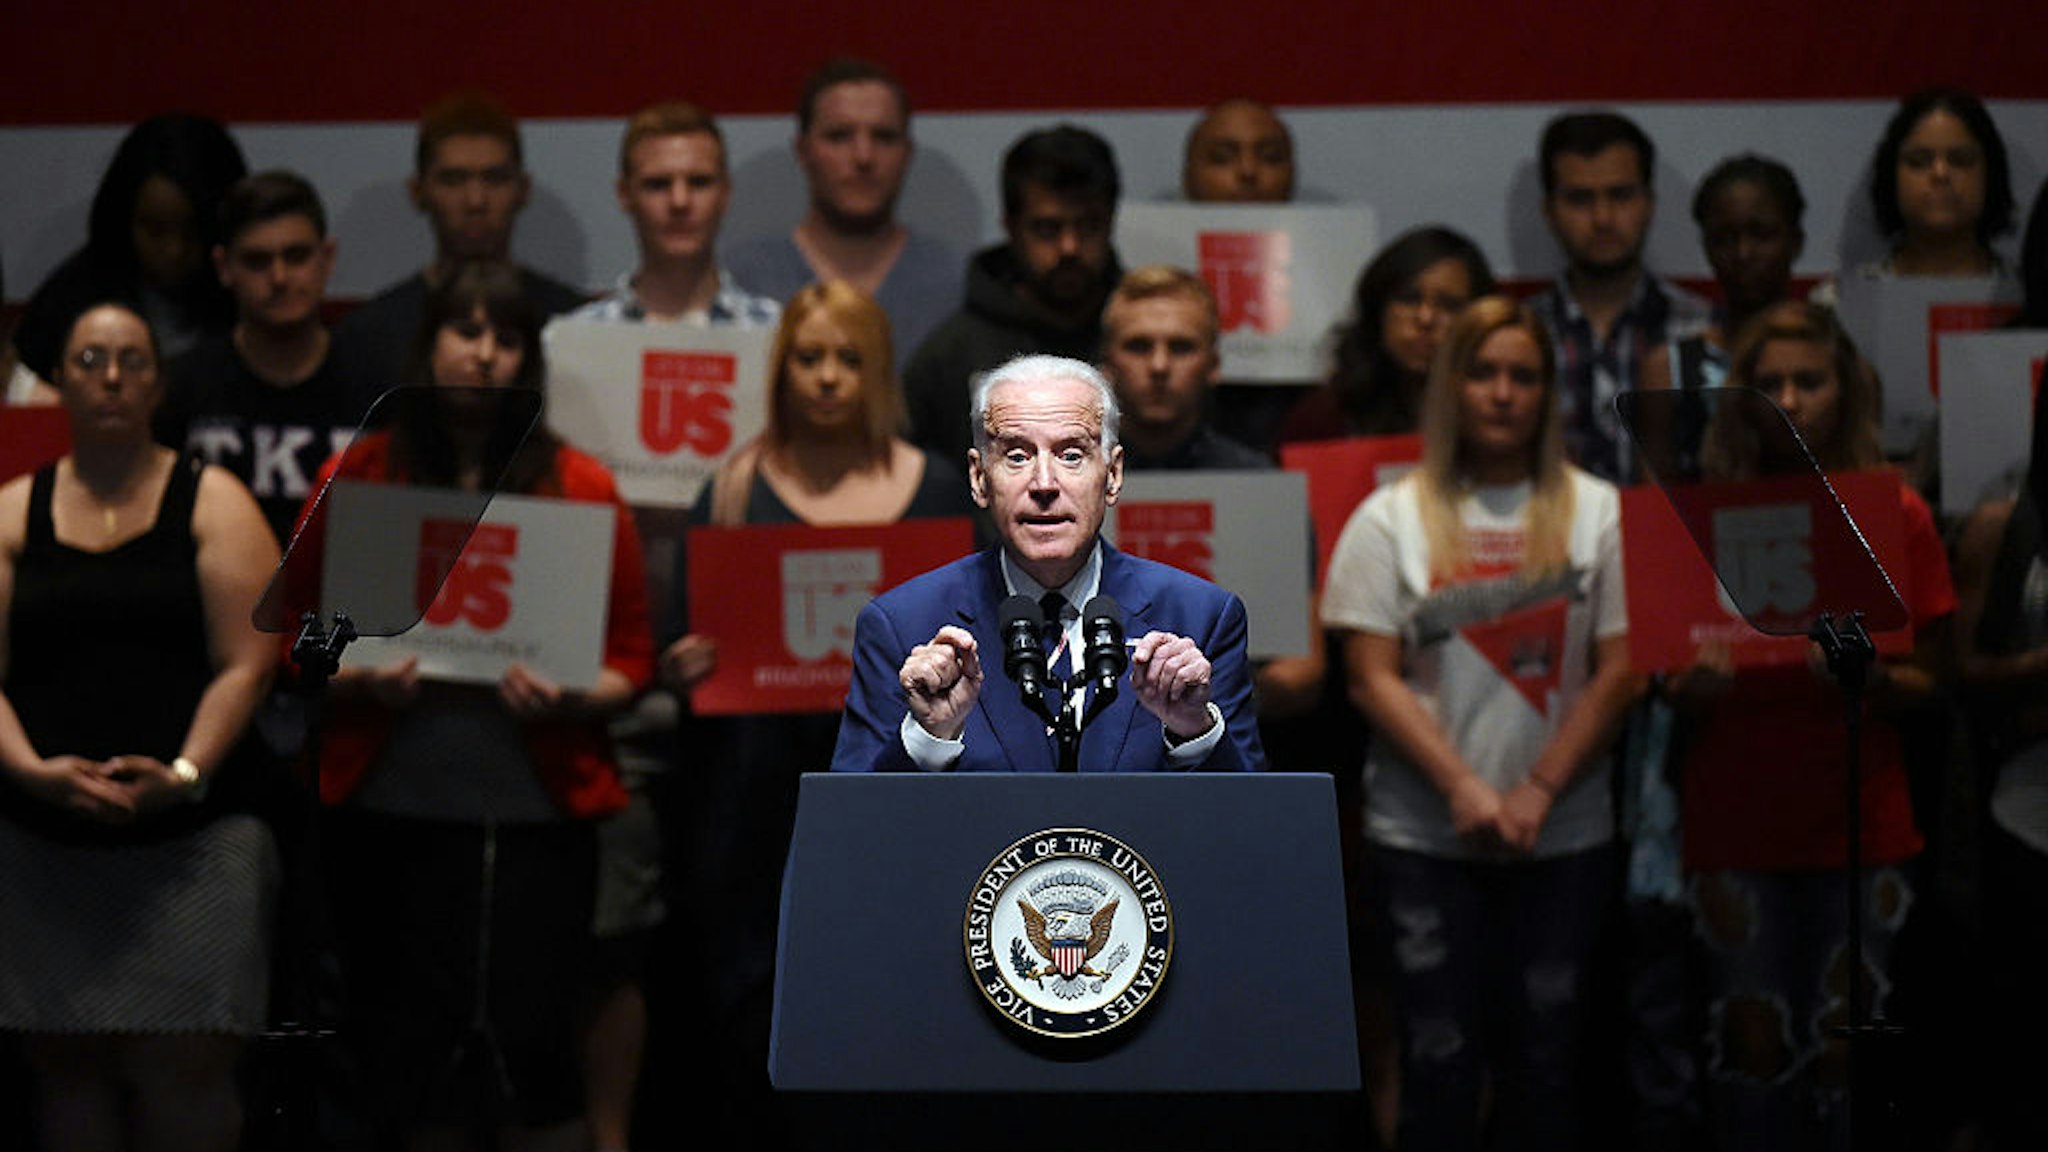 U.S. Vice President Joe Biden speaks to students as part of the national It's On Us Week of Action at the Cox Pavilion at UNLV on April 7, 2016 in Las Vegas, Nevada.